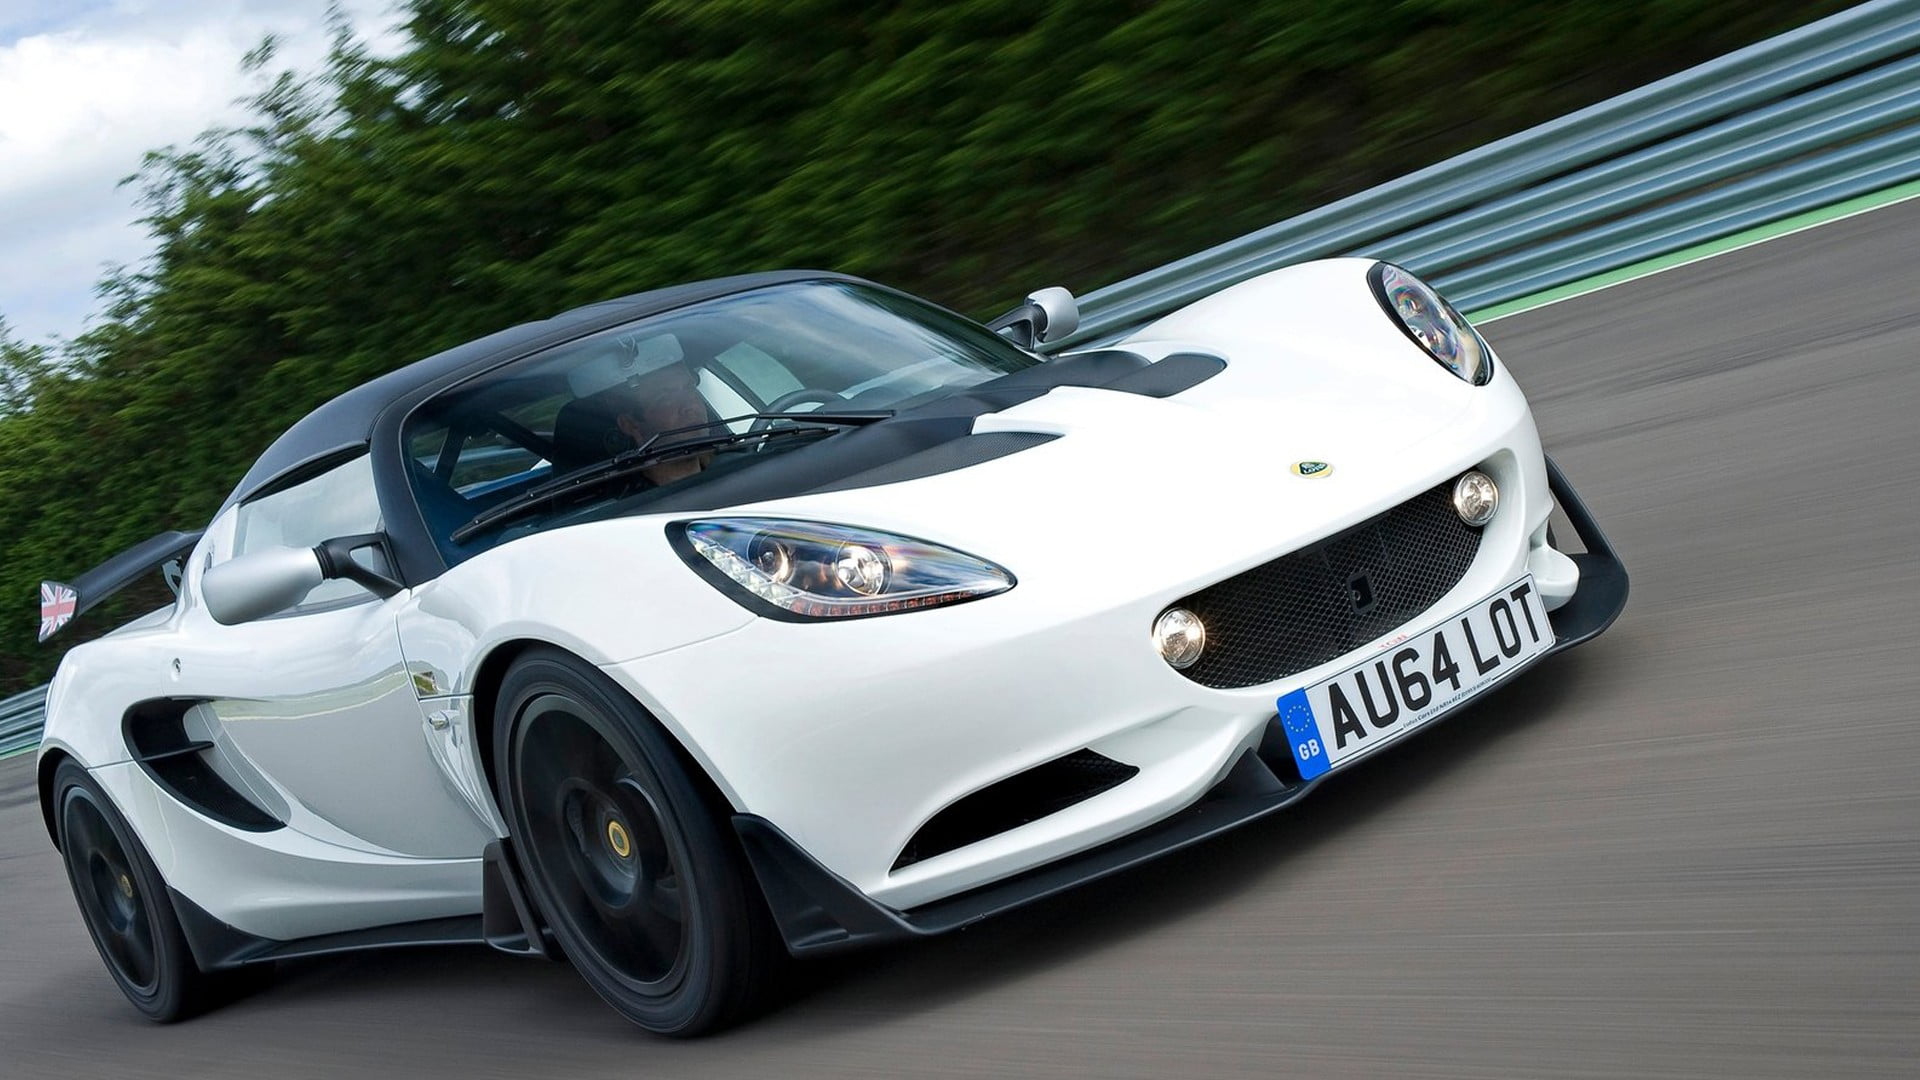 white coupe, 2015 Lotus Elise S Cup, vehicle, road, car, motor vehicle